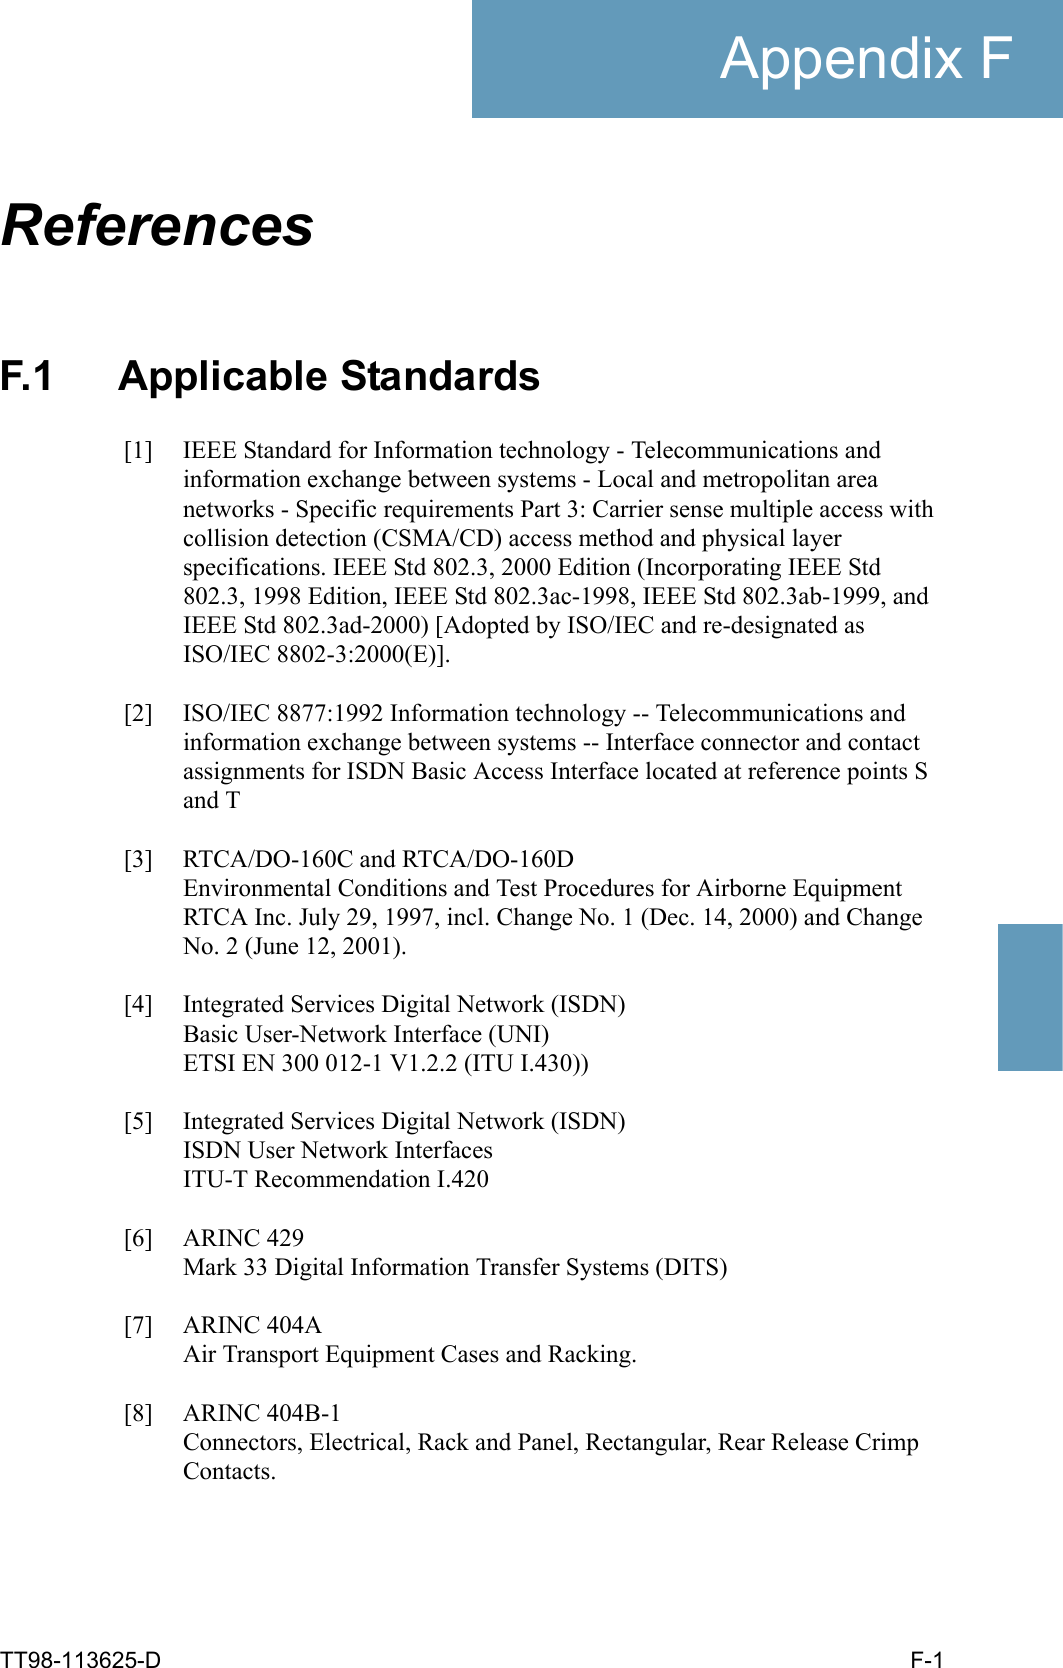 TT98-113625-D F-1Appendix FFFFFReferences FF.1 Applicable Standards[1] IEEE Standard for Information technology - Telecommunications and information exchange between systems - Local and metropolitan area networks - Specific requirements Part 3: Carrier sense multiple access with collision detection (CSMA/CD) access method and physical layer specifications. IEEE Std 802.3, 2000 Edition (Incorporating IEEE Std 802.3, 1998 Edition, IEEE Std 802.3ac-1998, IEEE Std 802.3ab-1999, and IEEE Std 802.3ad-2000) [Adopted by ISO/IEC and re-designated as ISO/IEC 8802-3:2000(E)].[2] ISO/IEC 8877:1992 Information technology -- Telecommunications and information exchange between systems -- Interface connector and contact assignments for ISDN Basic Access Interface located at reference points S and T[3] RTCA/DO-160C and RTCA/DO-160DEnvironmental Conditions and Test Procedures for Airborne EquipmentRTCA Inc. July 29, 1997, incl. Change No. 1 (Dec. 14, 2000) and Change No. 2 (June 12, 2001).[4] Integrated Services Digital Network (ISDN)Basic User-Network Interface (UNI)ETSI EN 300 012-1 V1.2.2 (ITU I.430))[5] Integrated Services Digital Network (ISDN)ISDN User Network InterfacesITU-T Recommendation I.420[6] ARINC 429Mark 33 Digital Information Transfer Systems (DITS)[7] ARINC 404AAir Transport Equipment Cases and Racking.[8] ARINC 404B-1Connectors, Electrical, Rack and Panel, Rectangular, Rear Release Crimp Contacts.